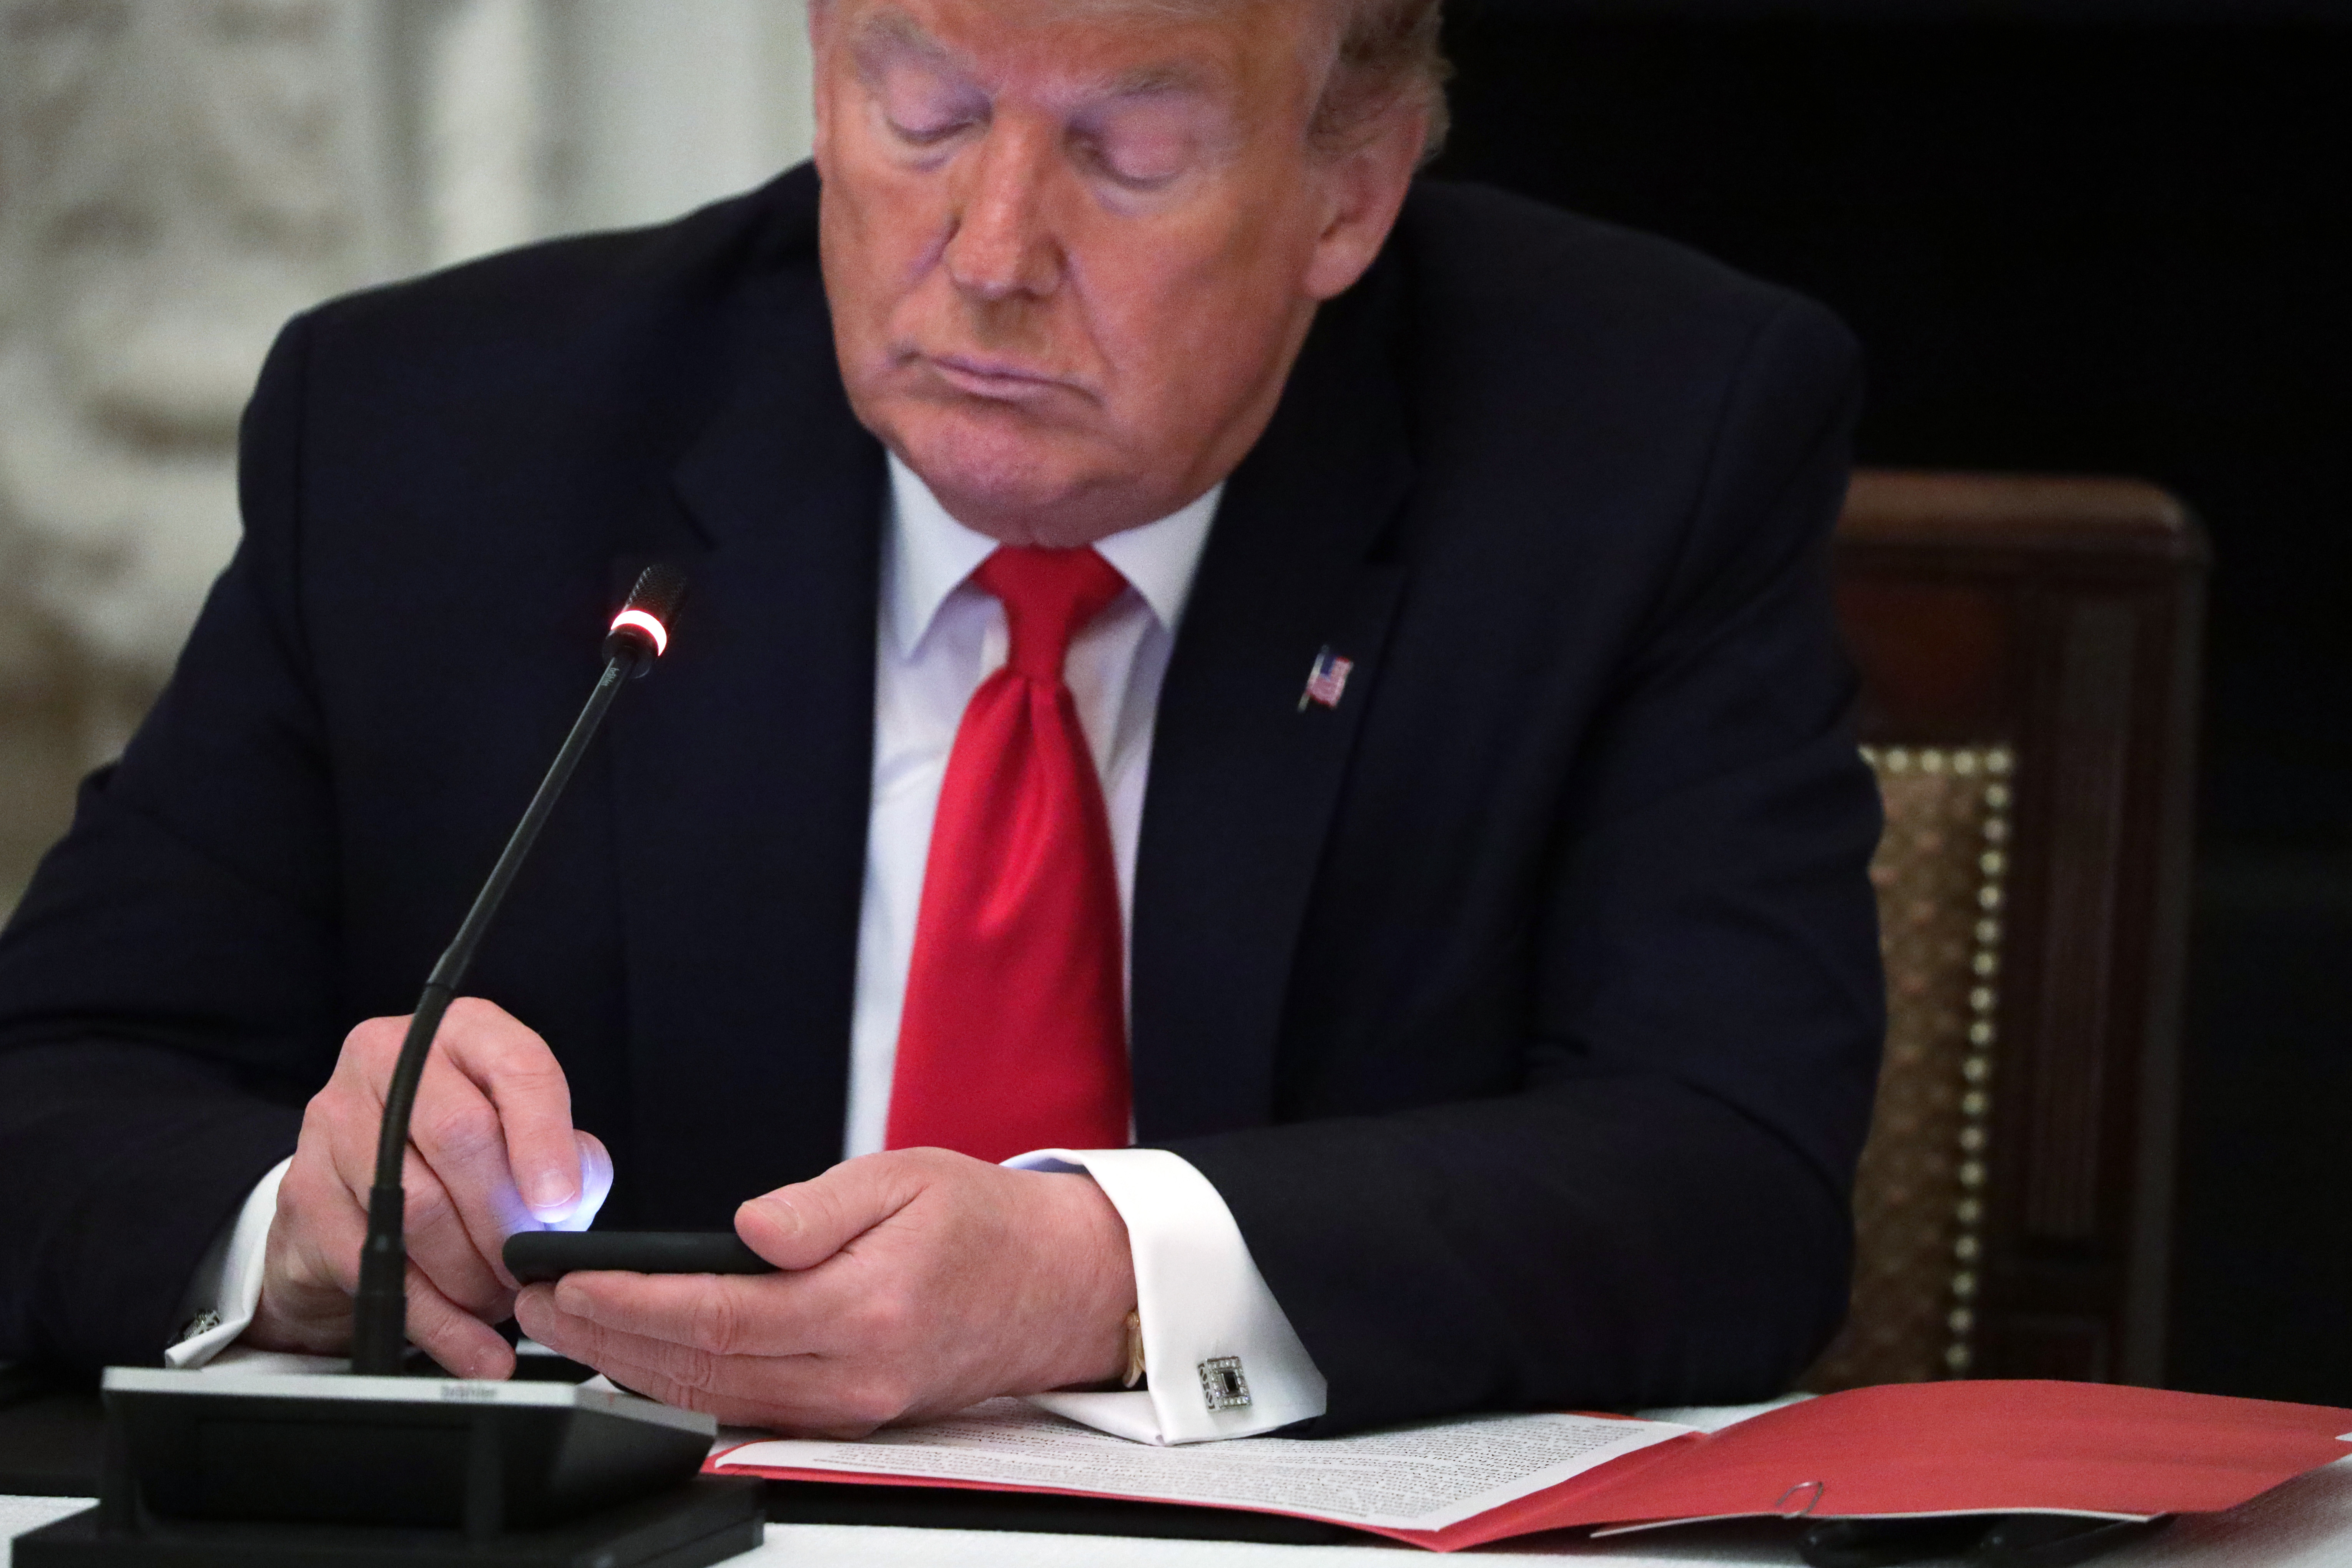 WASHINGTON, DC - JUNE 18: U.S. President Donald Trump works on his phone during a roundtable at the State Dining Room of the White House June 18, 2020 in Washington, DC. President Trump held a roundtable discussion with Governors and small business owners on the reopening of American’s small business. (Photo by Alex Wong/Getty Images)